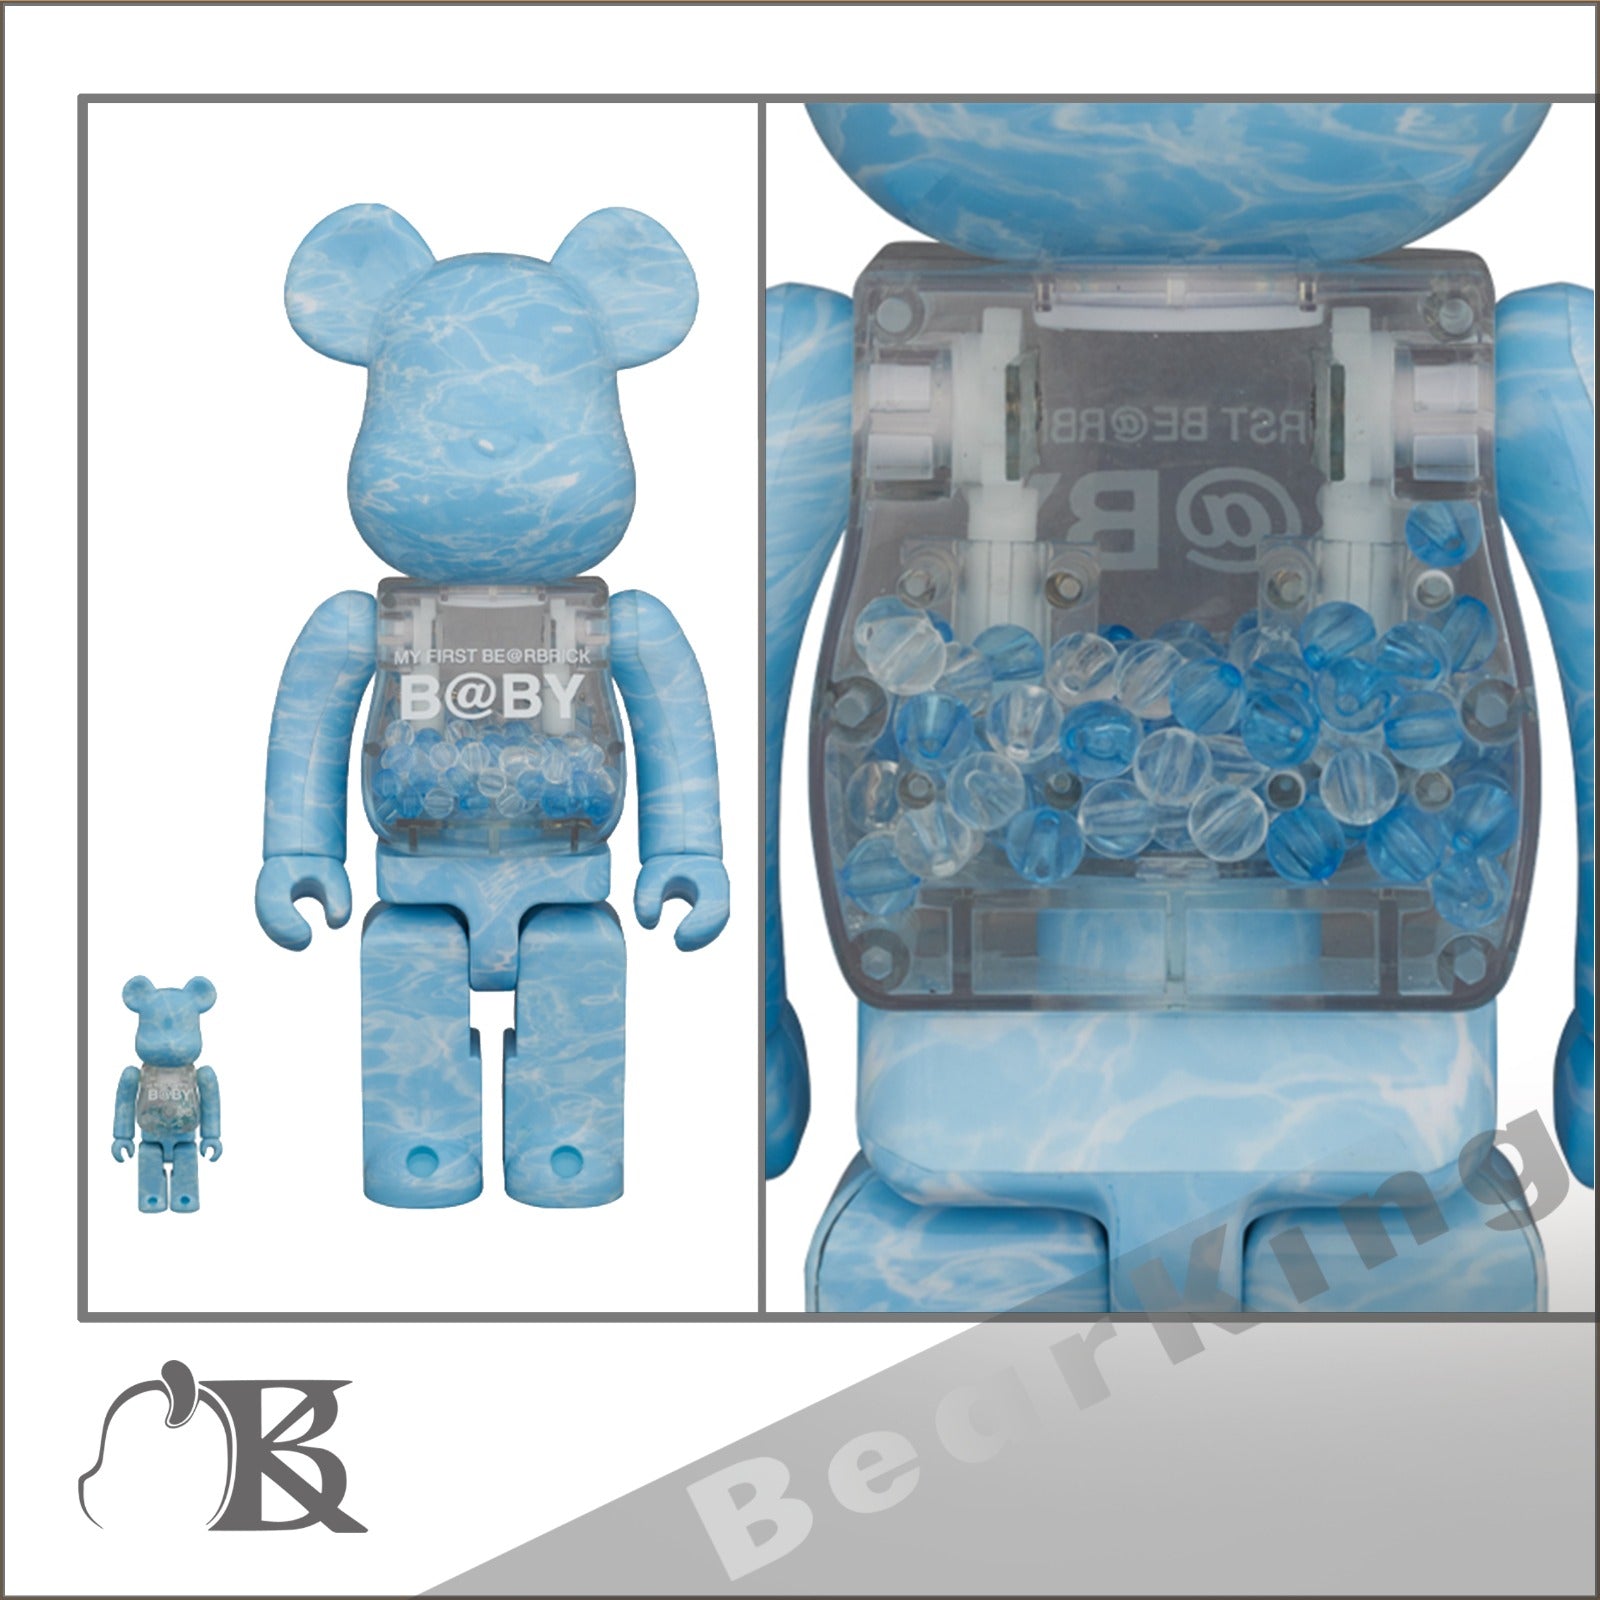 MY FIRST BE@RBRICK B@BY WATER CREST Ver. 100％ & 400％ 千秋baby